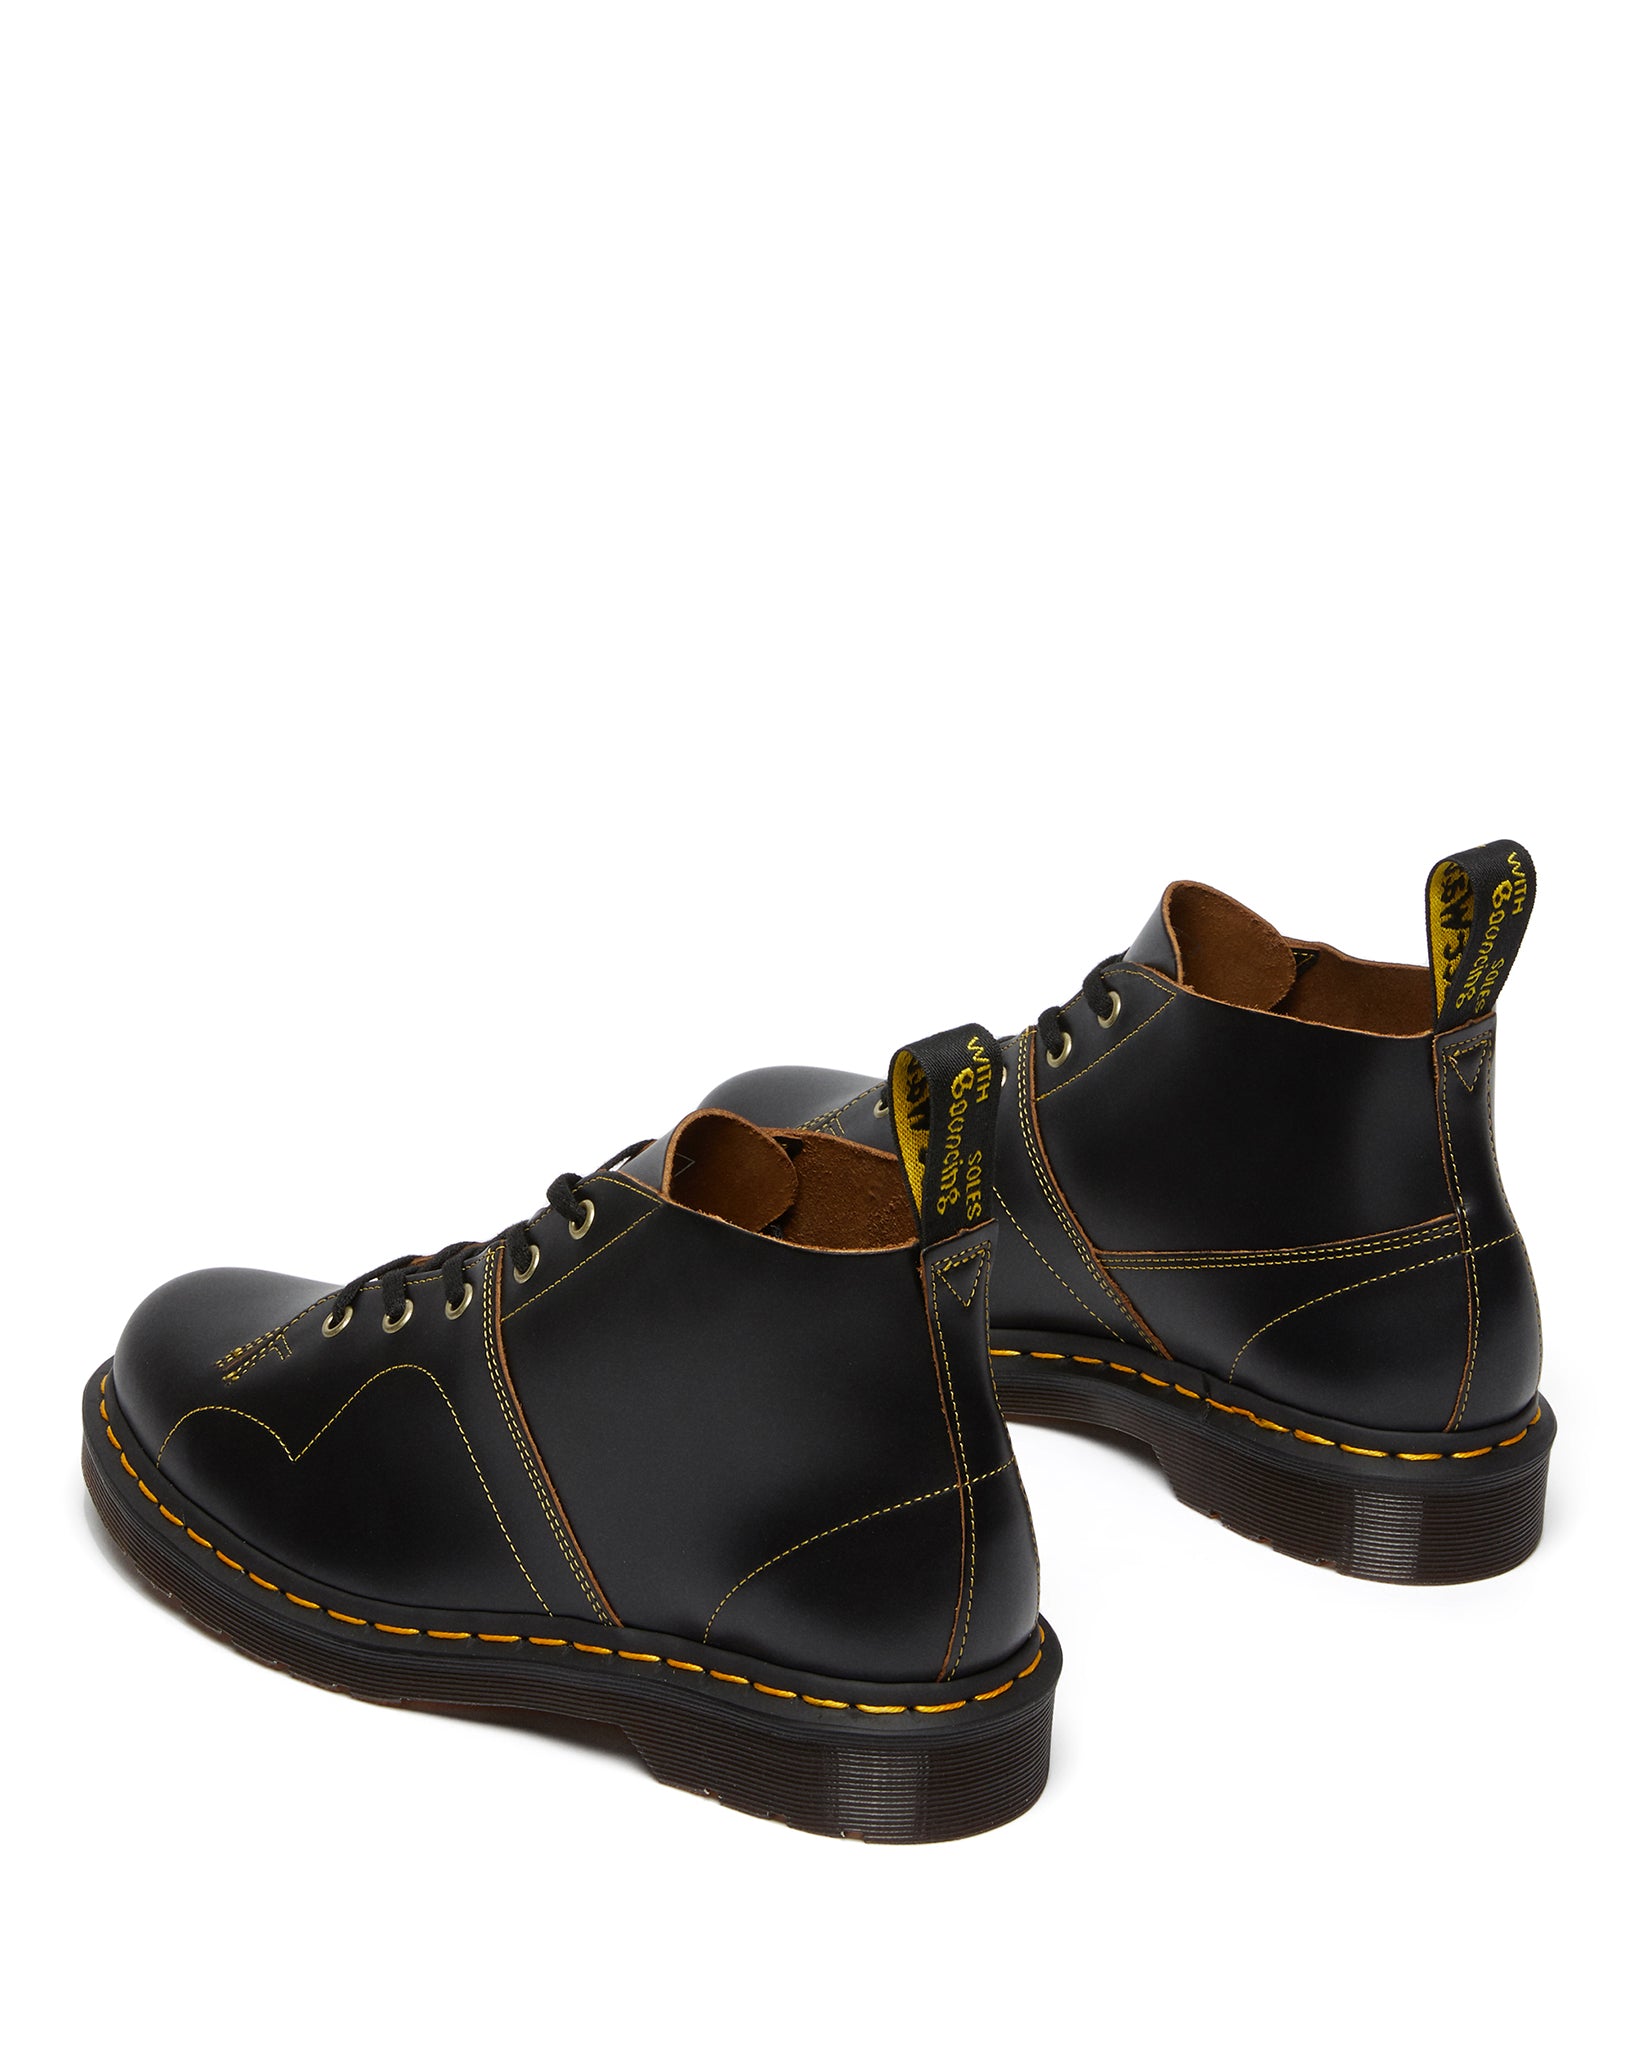 Archive Church Black Vintage Smooth Leather Monkey Boots